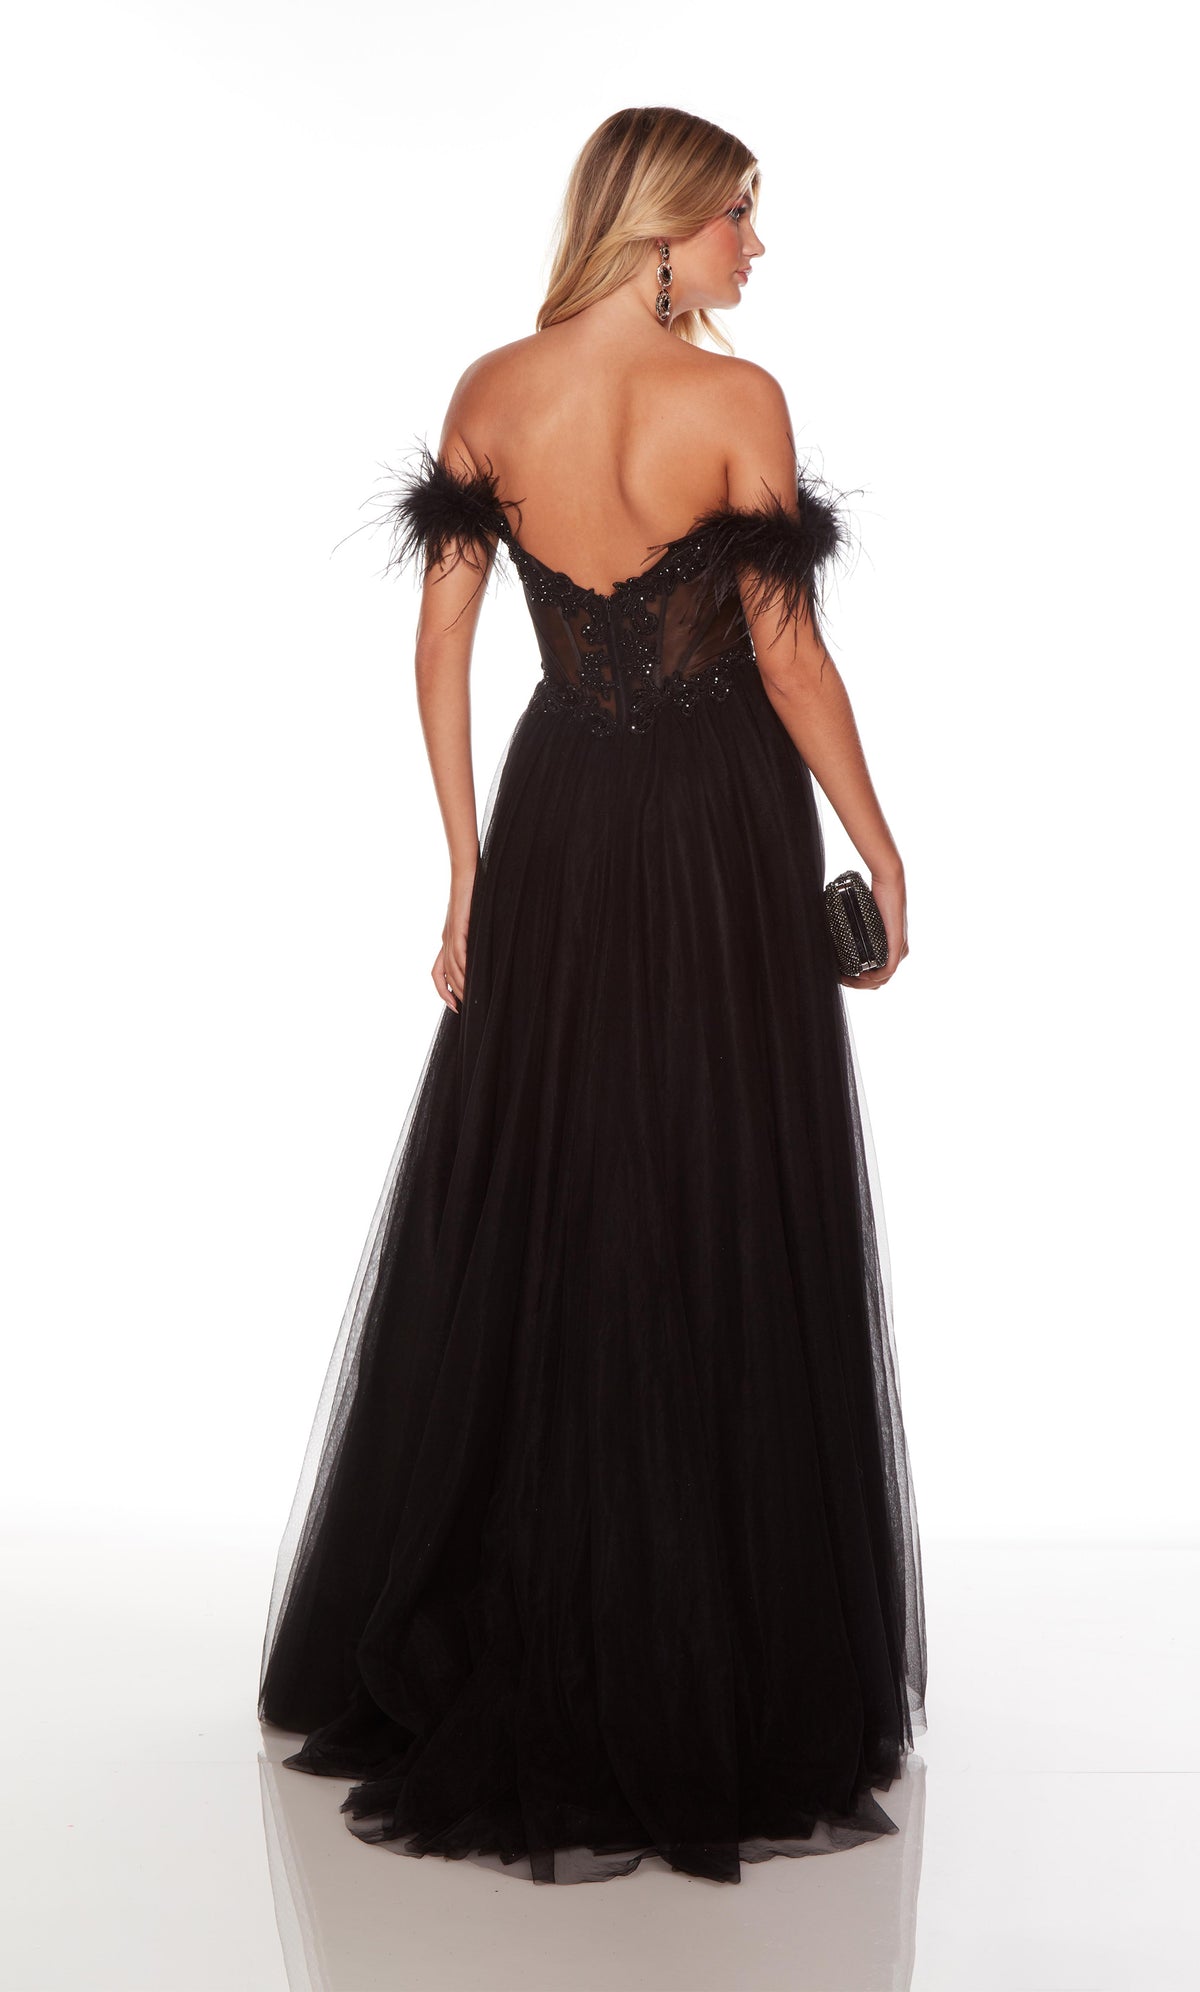 Off the shoulder black feather dress with a sheer lace corset bodice and front slit.